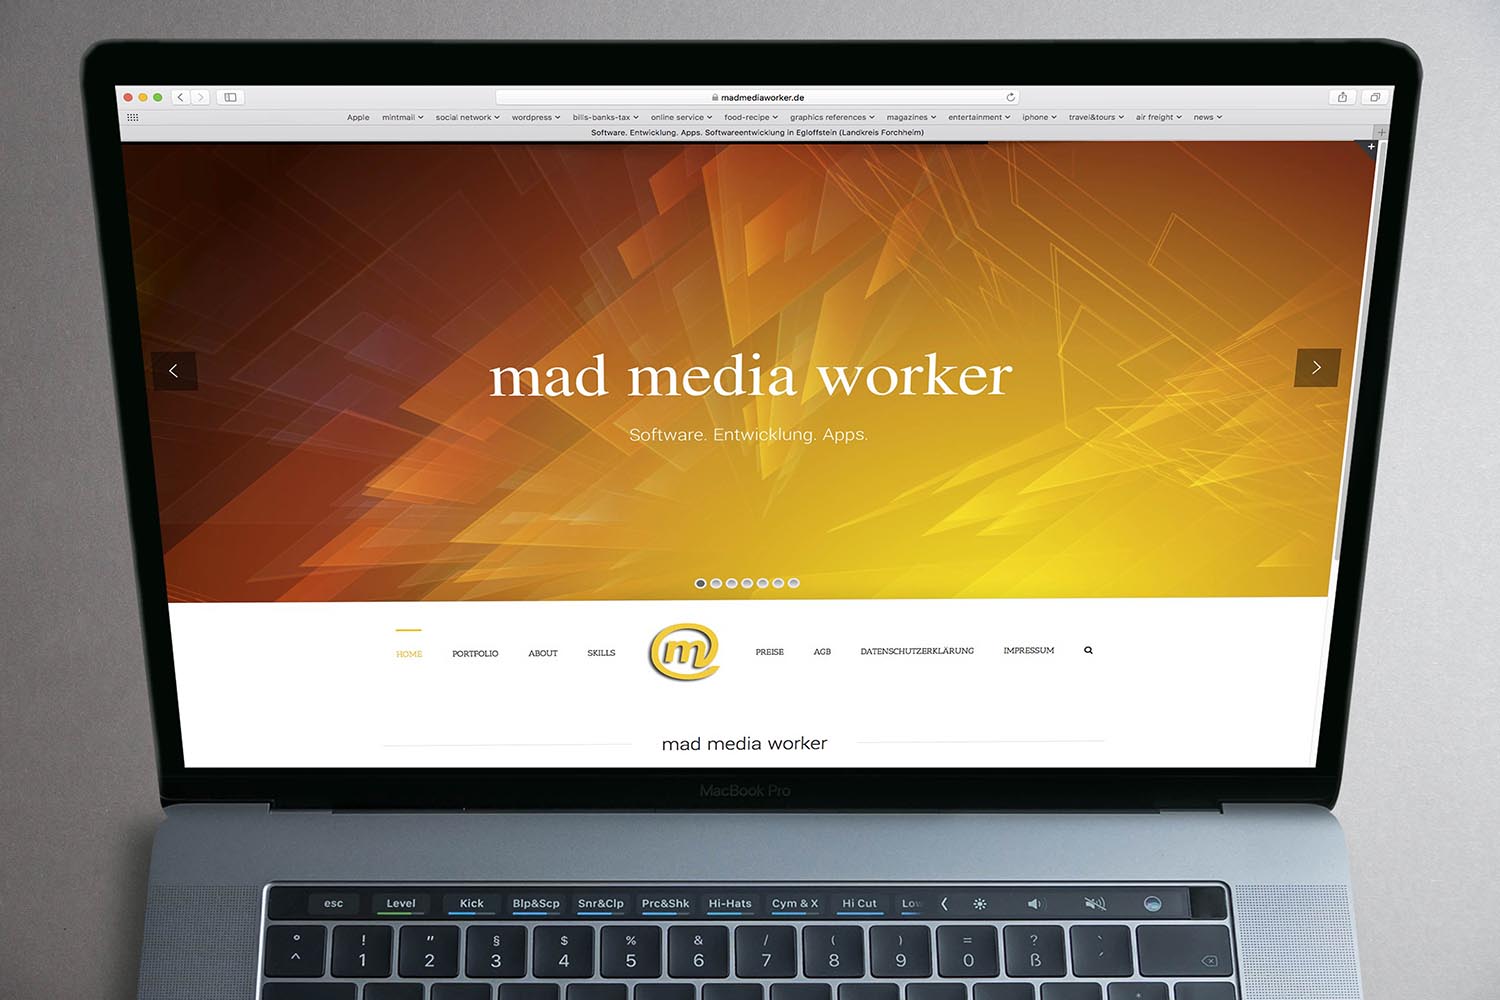 Mad Media Worker Website - This image is copyright protected.